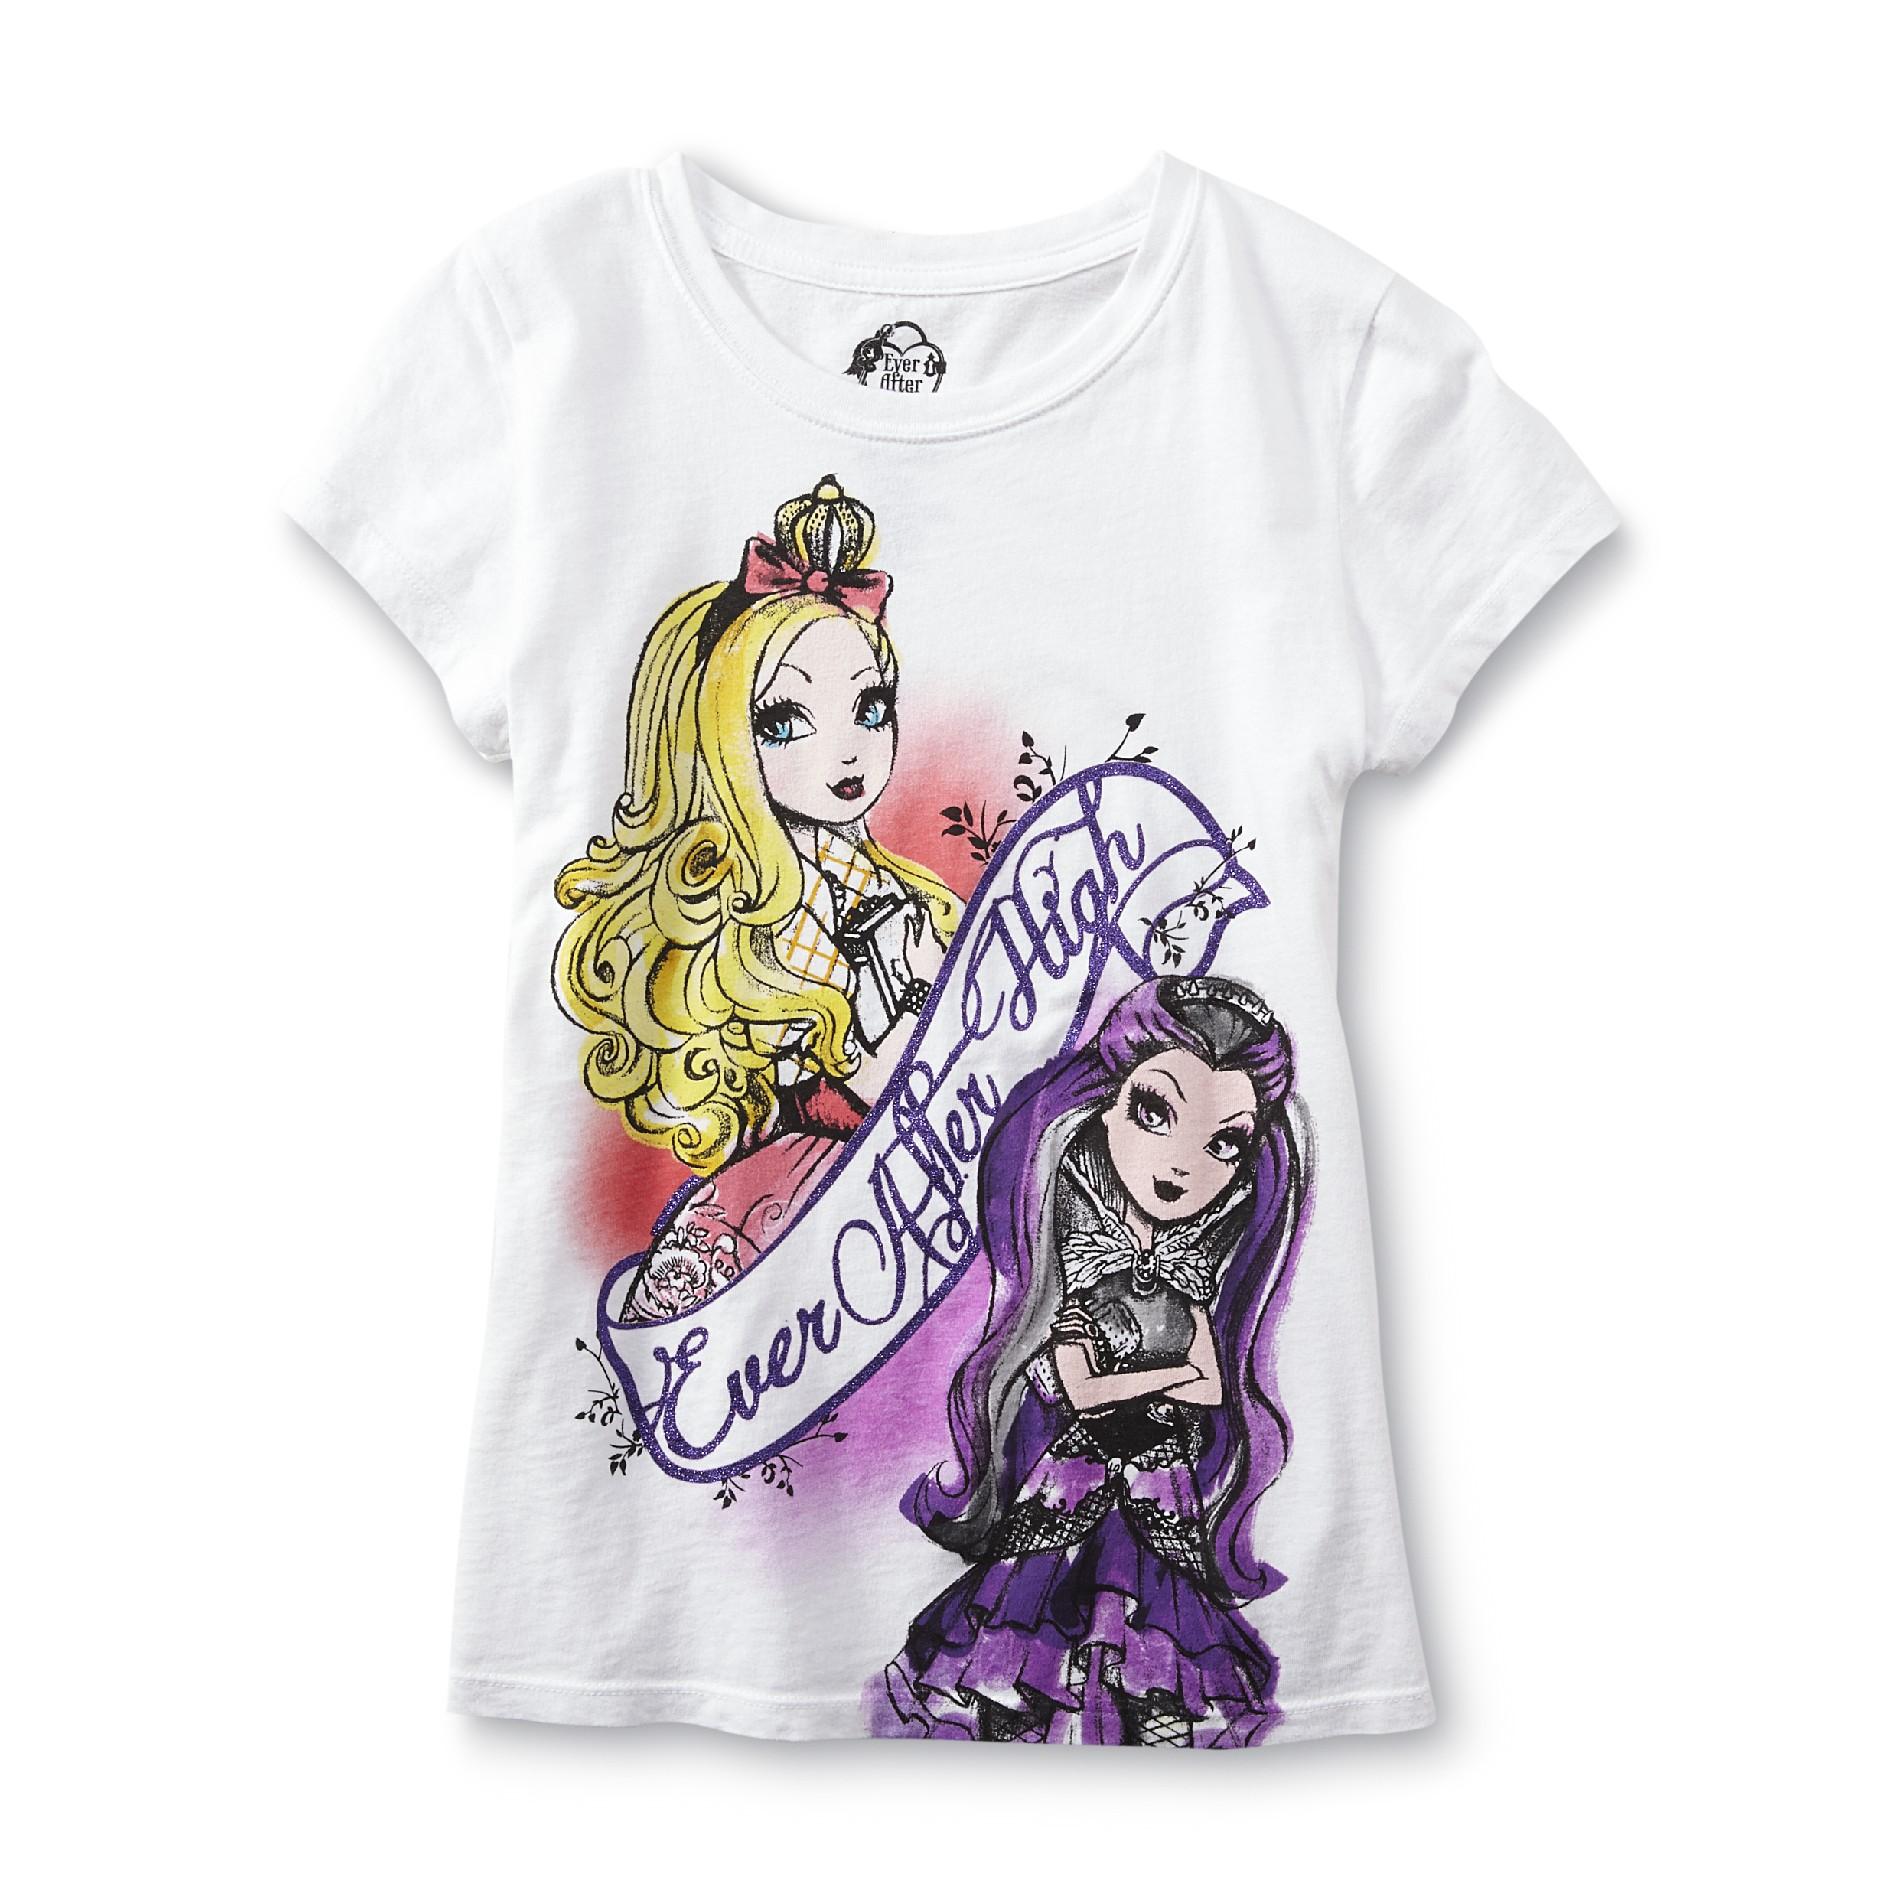 Monster High Ever After High Girl's Graphic T-Shirt